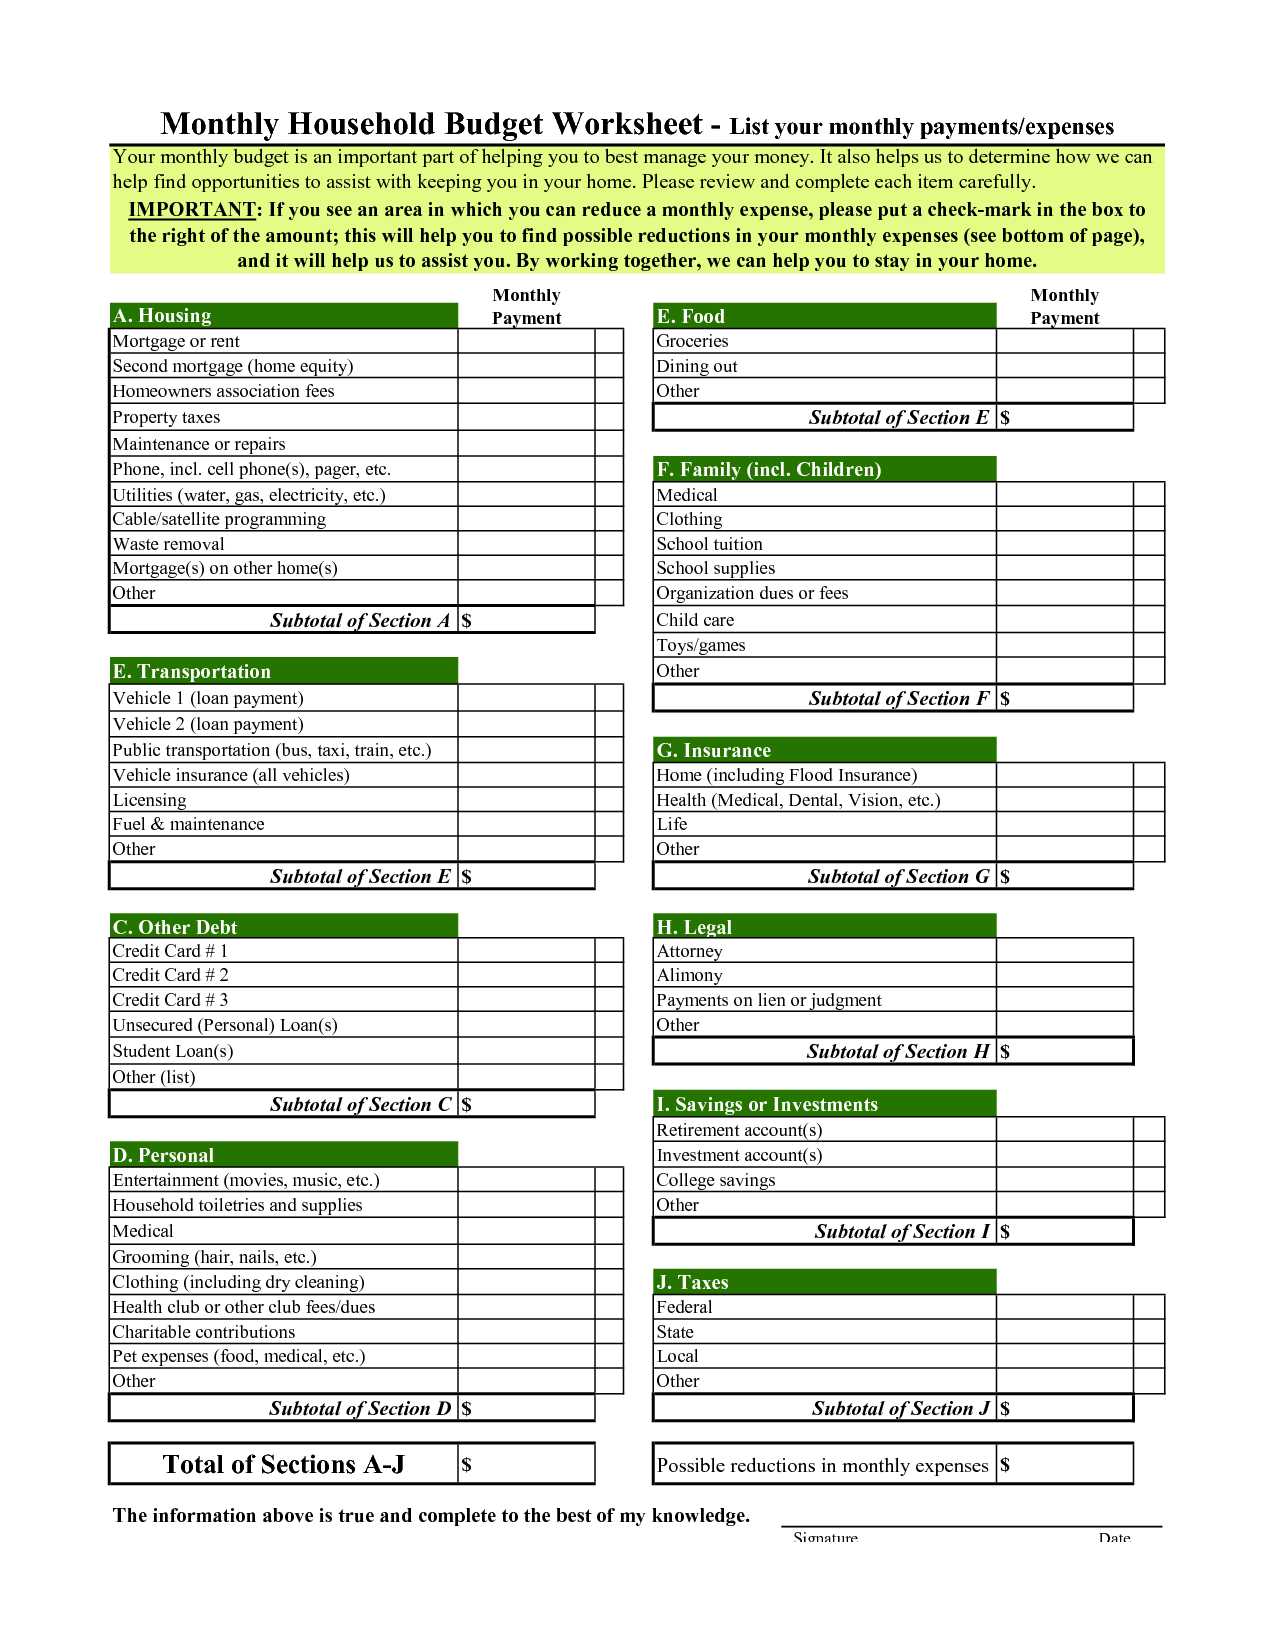 Downloadable Budget Worksheets and Bud Spreadsheet Excel 2010 Example Best S Monthly Bud